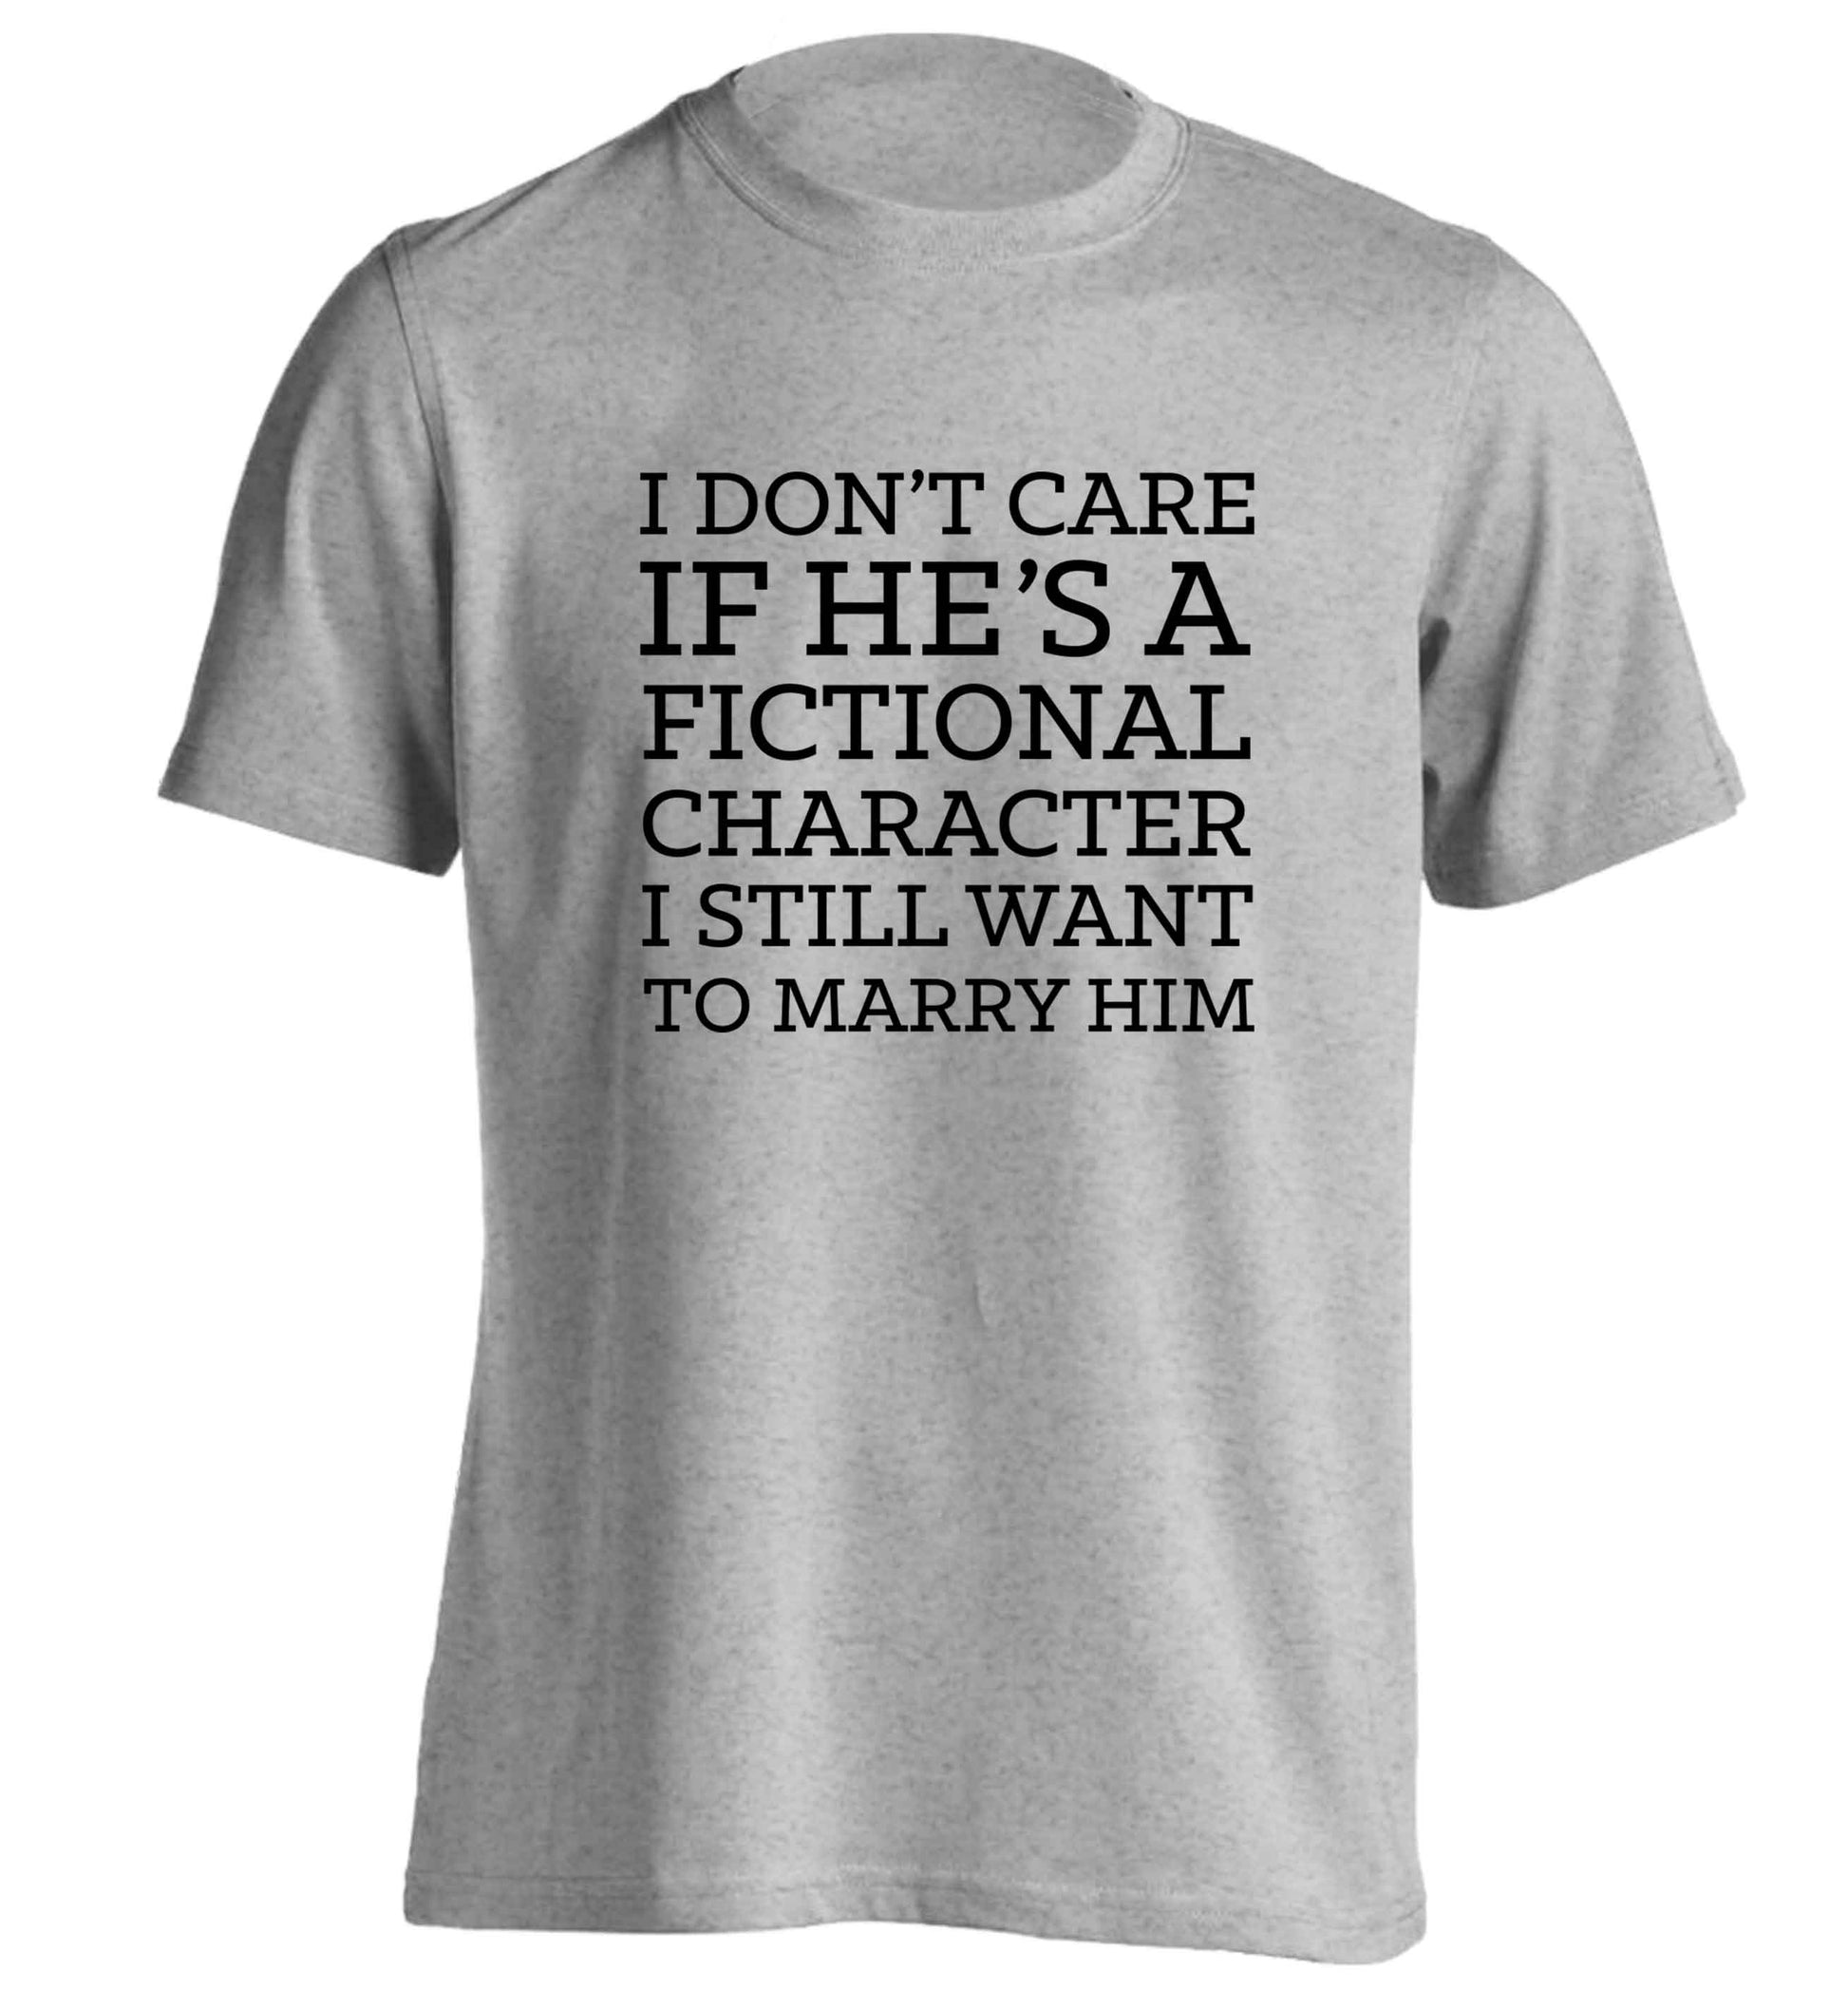 I don't care if he's a fictional character I still want to marry him adults unisex grey Tshirt 2XL